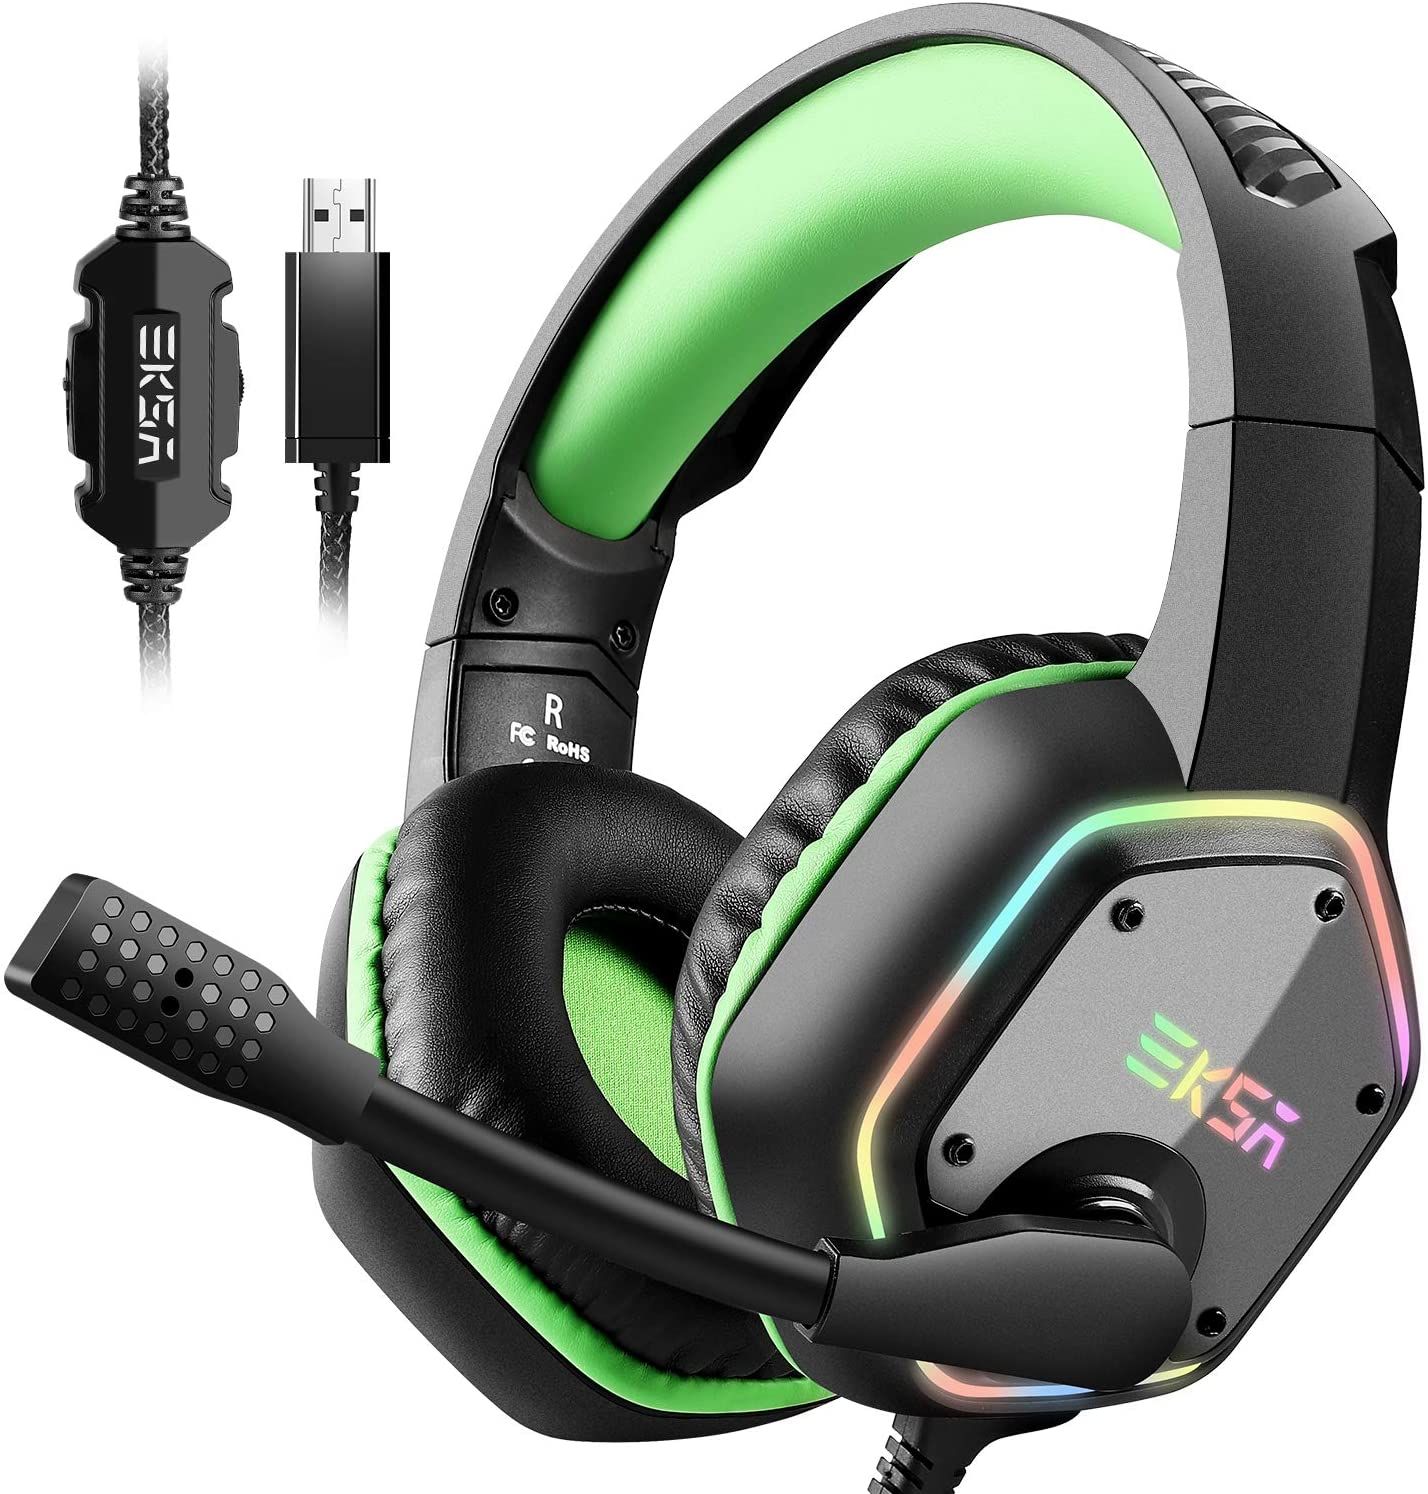 Corner Best Gaming Headset Brands Ps4 for Small Room